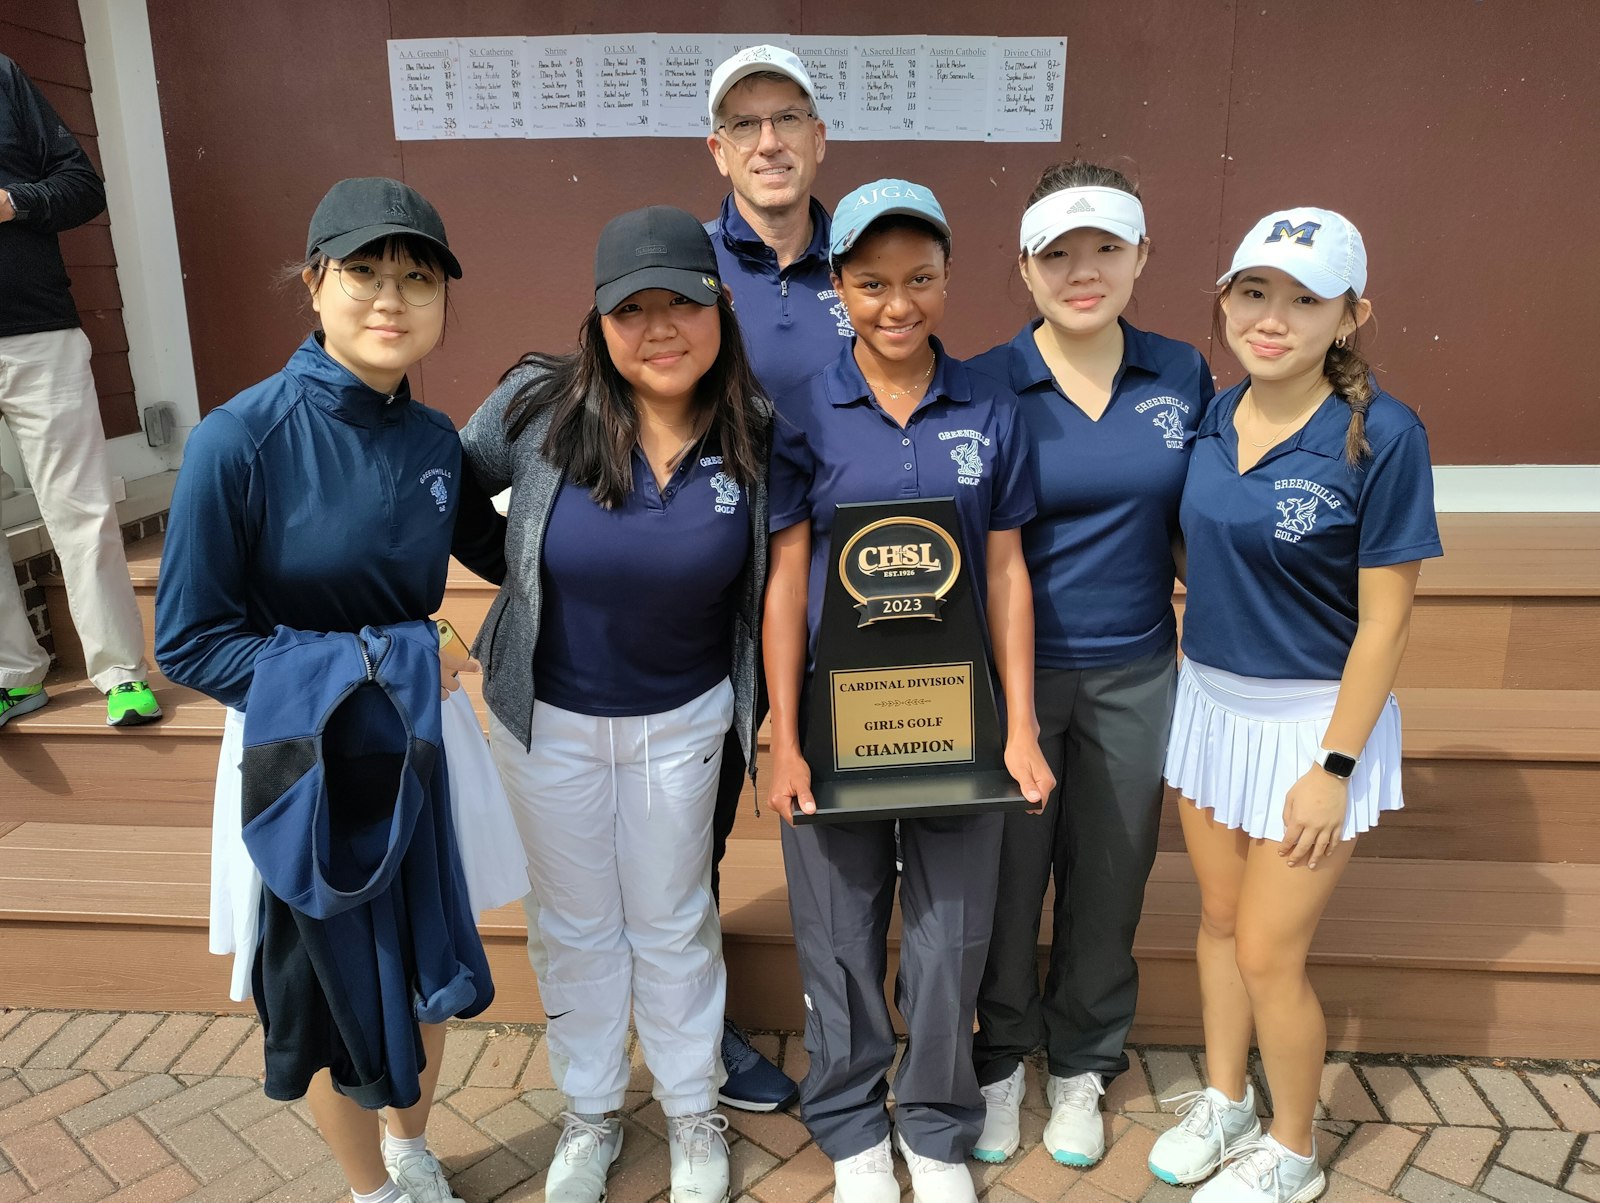 Mia Melendez holds the plaque proclaiming Ann Arbor Greenhills as CHSL 2023 Cardinal Division girls golf champs. Melendez won medalist honors with a 4-under 65 on the Detroit Golf Club South Course. Elisha Park and Hannah Lee on Melendez’s left and Bella Young and Kayla Young on her right round out the Gryphons team coached by Michael Karr.